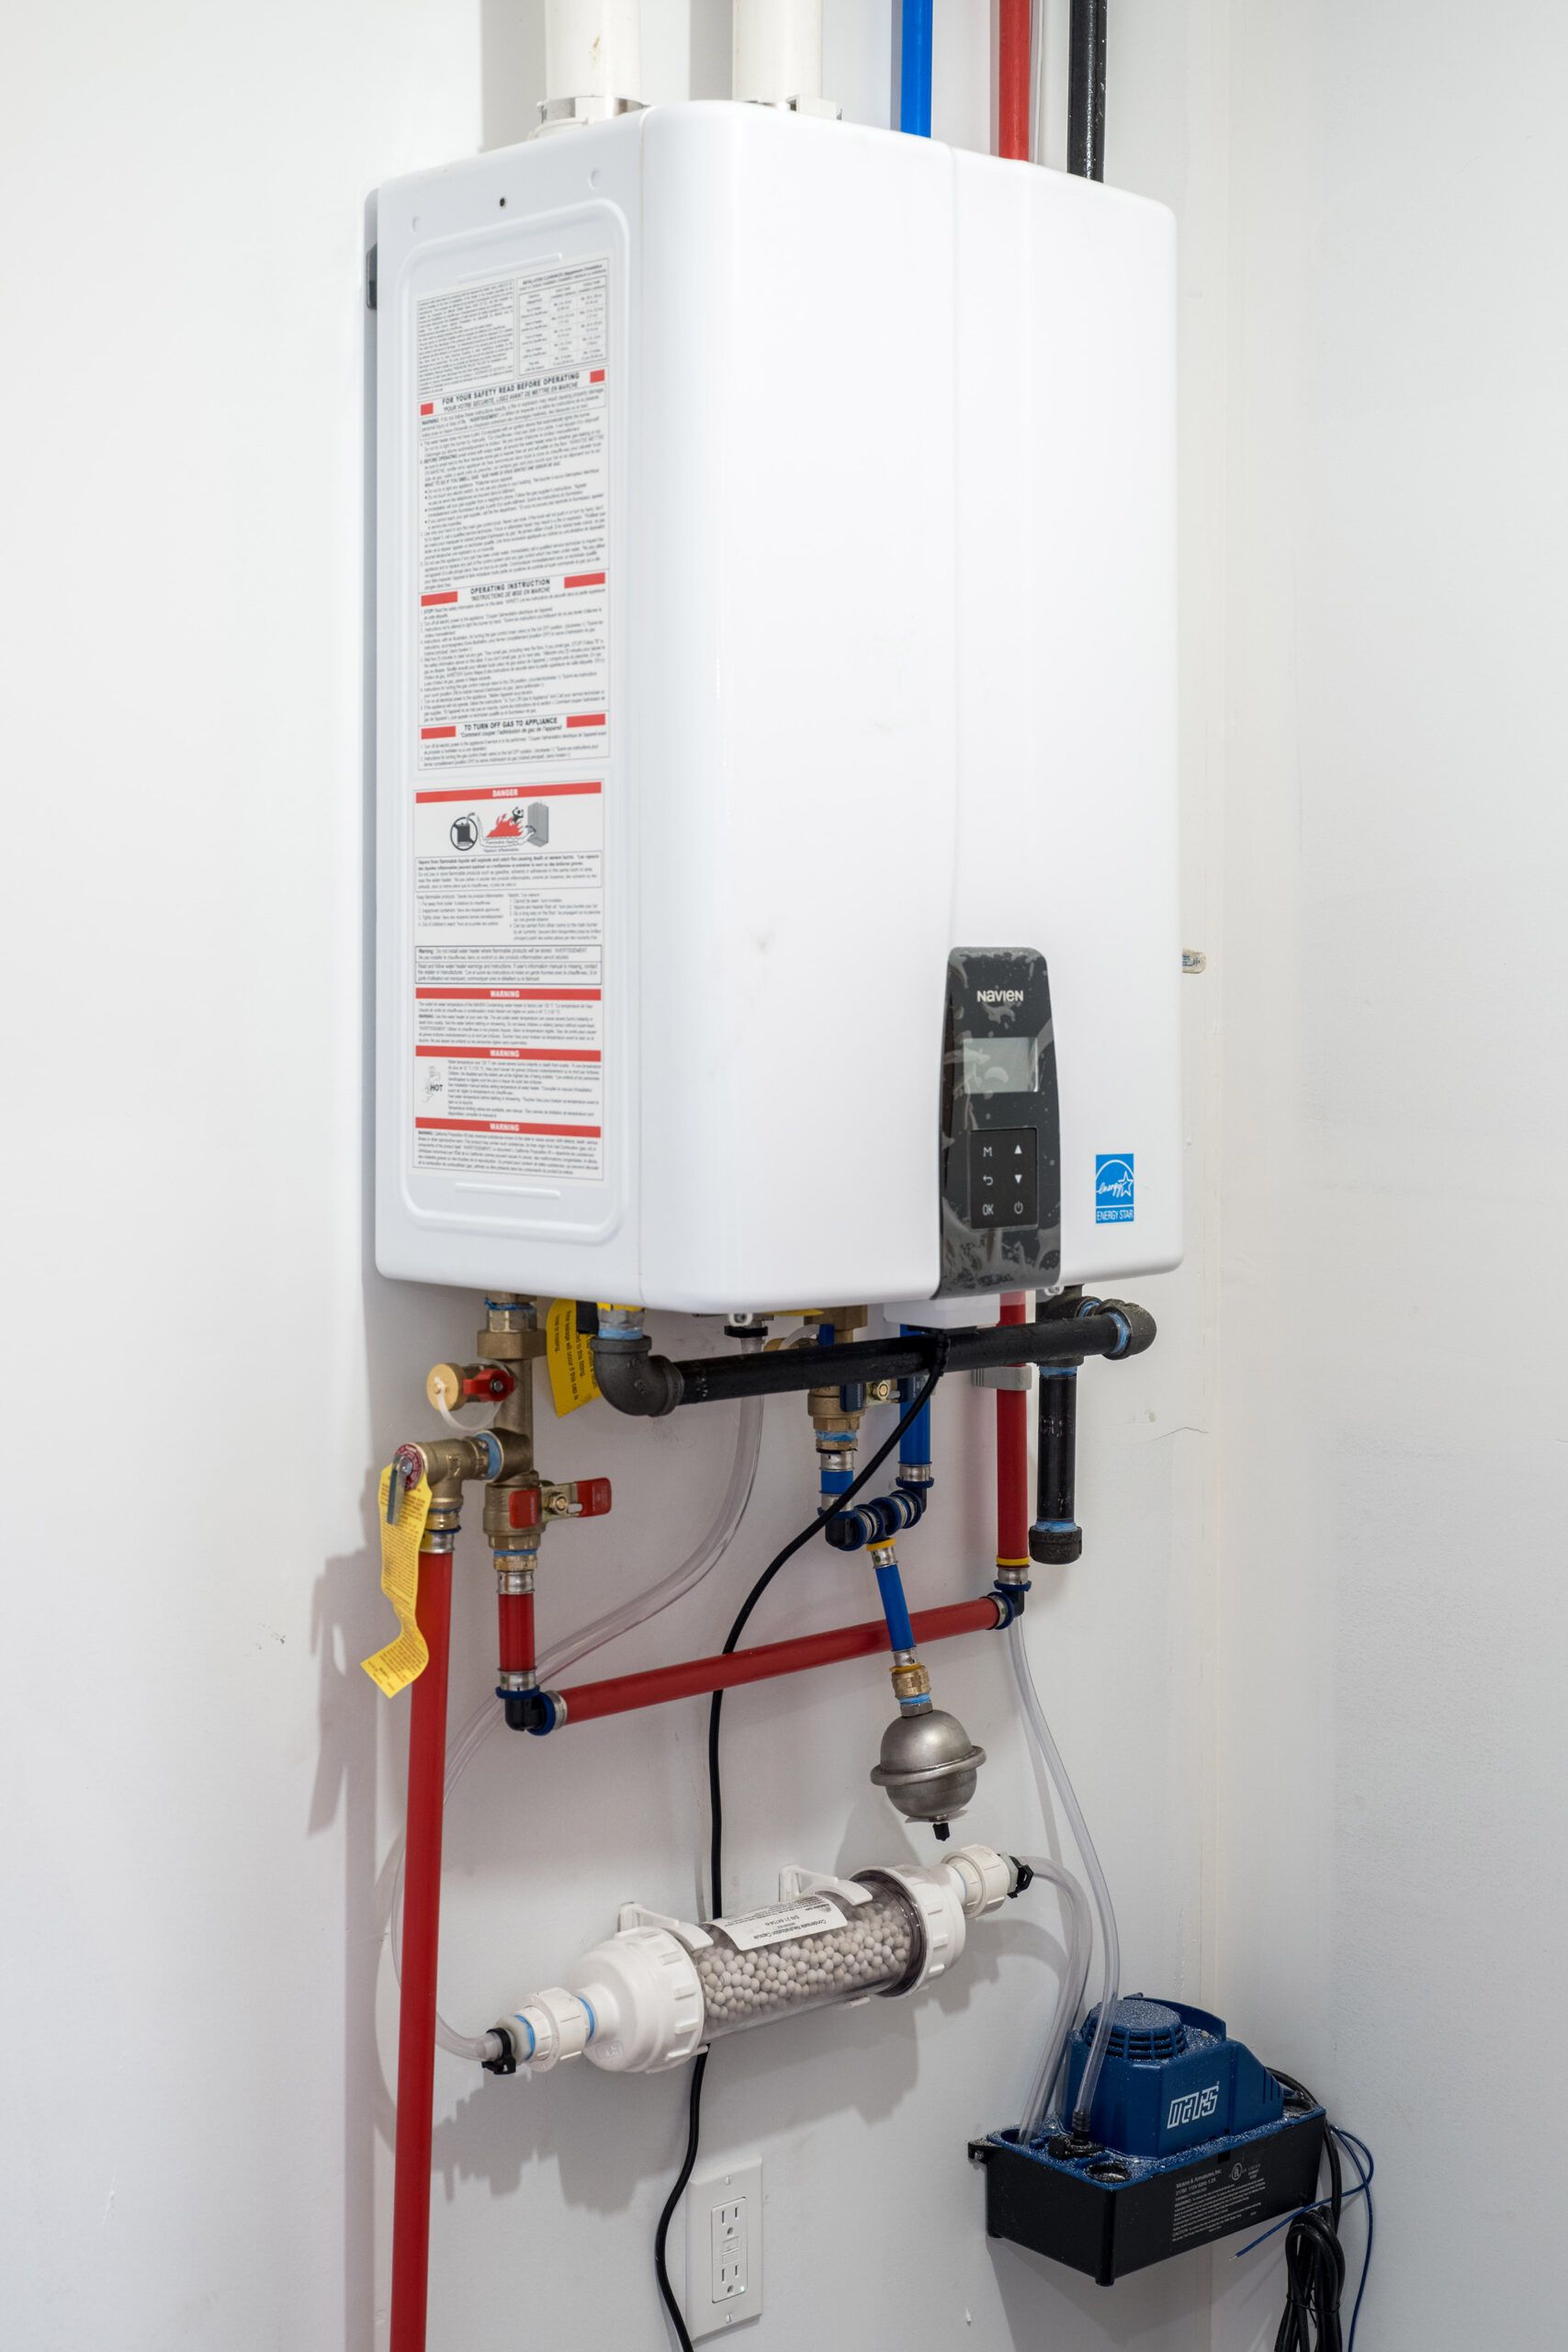 Hot Water Heater Buyer's Guide For The Home